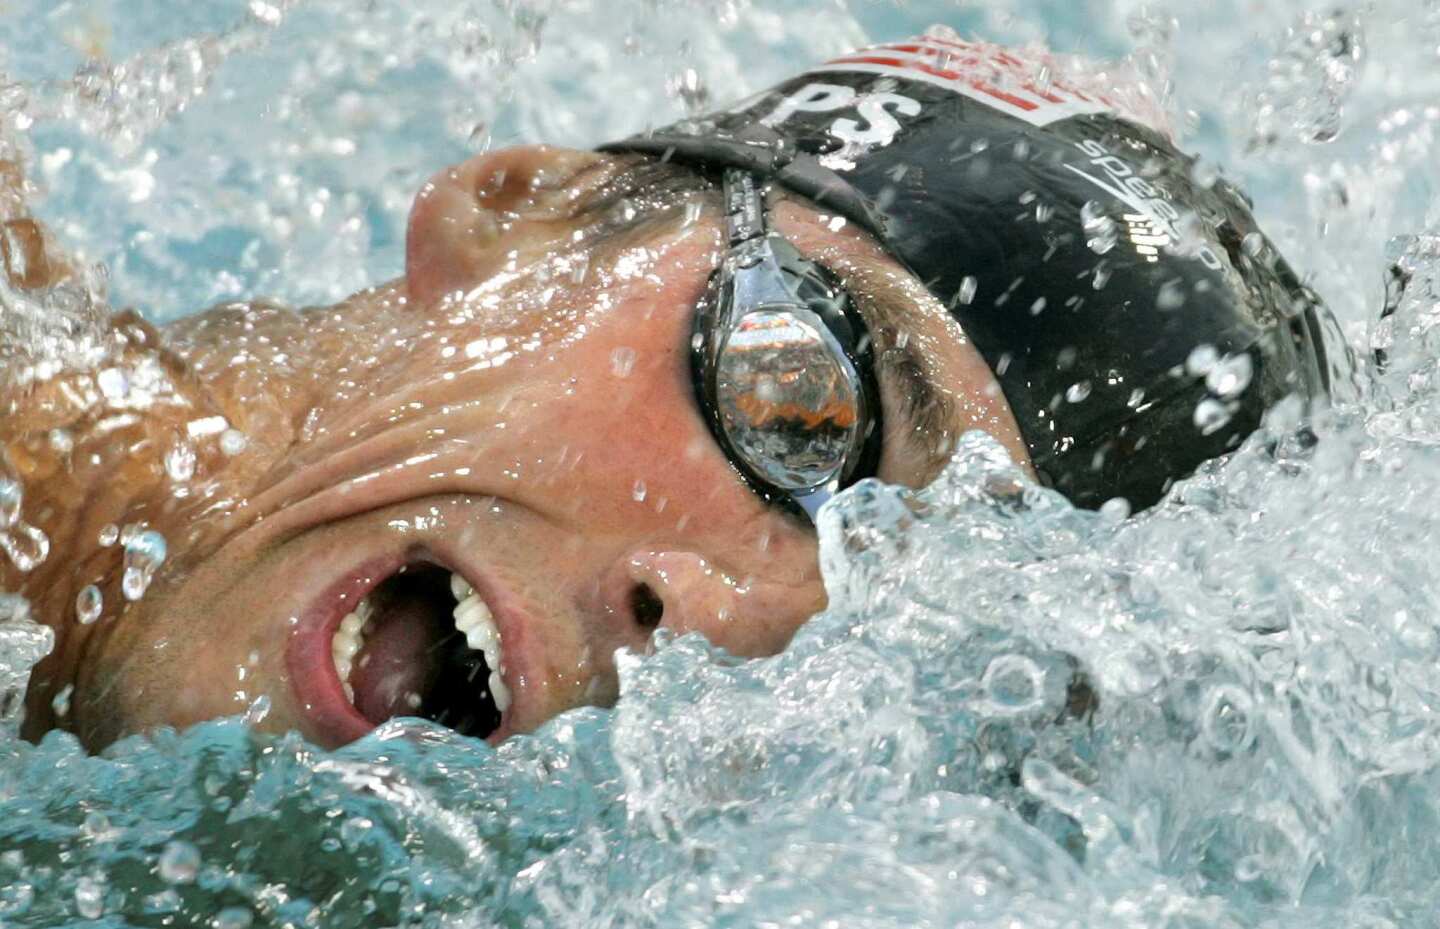 Michael Phelps competes in the 200-meter freestyle in the 2004 Athens Olympics.